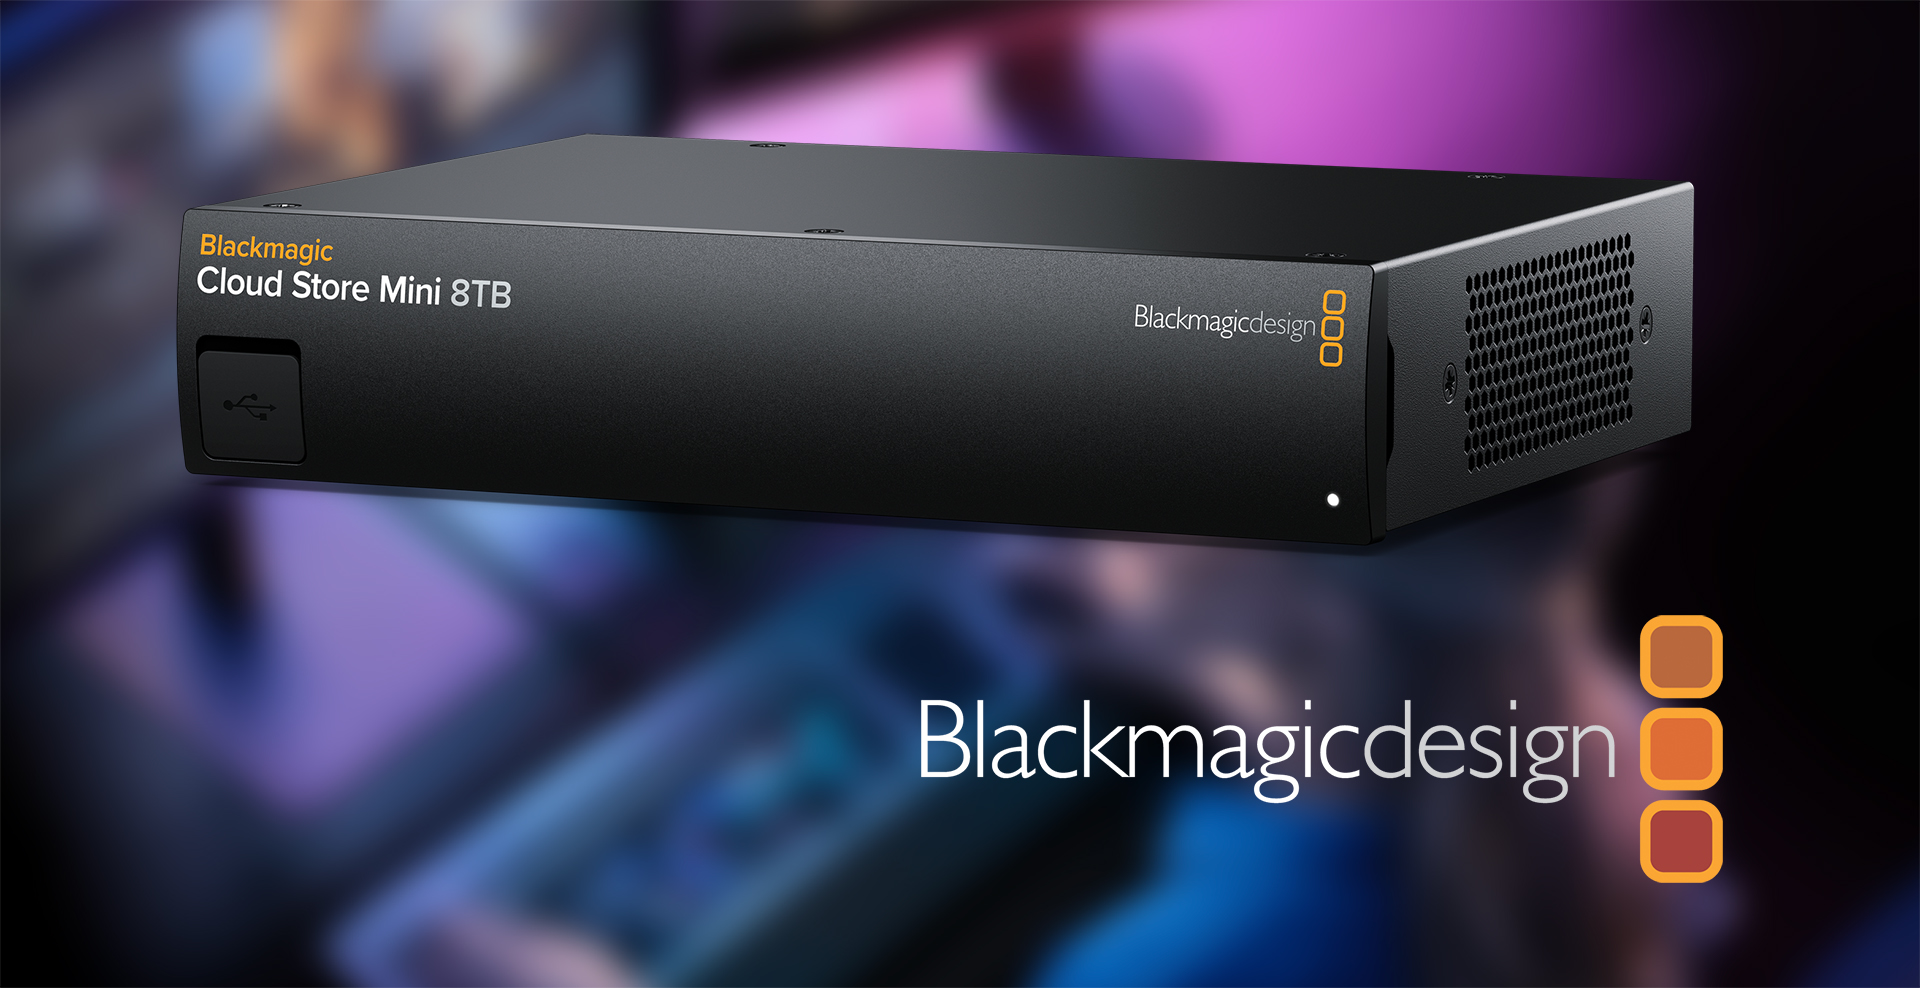 Review: A look at the Blackmagic Cloud Store Mini 7